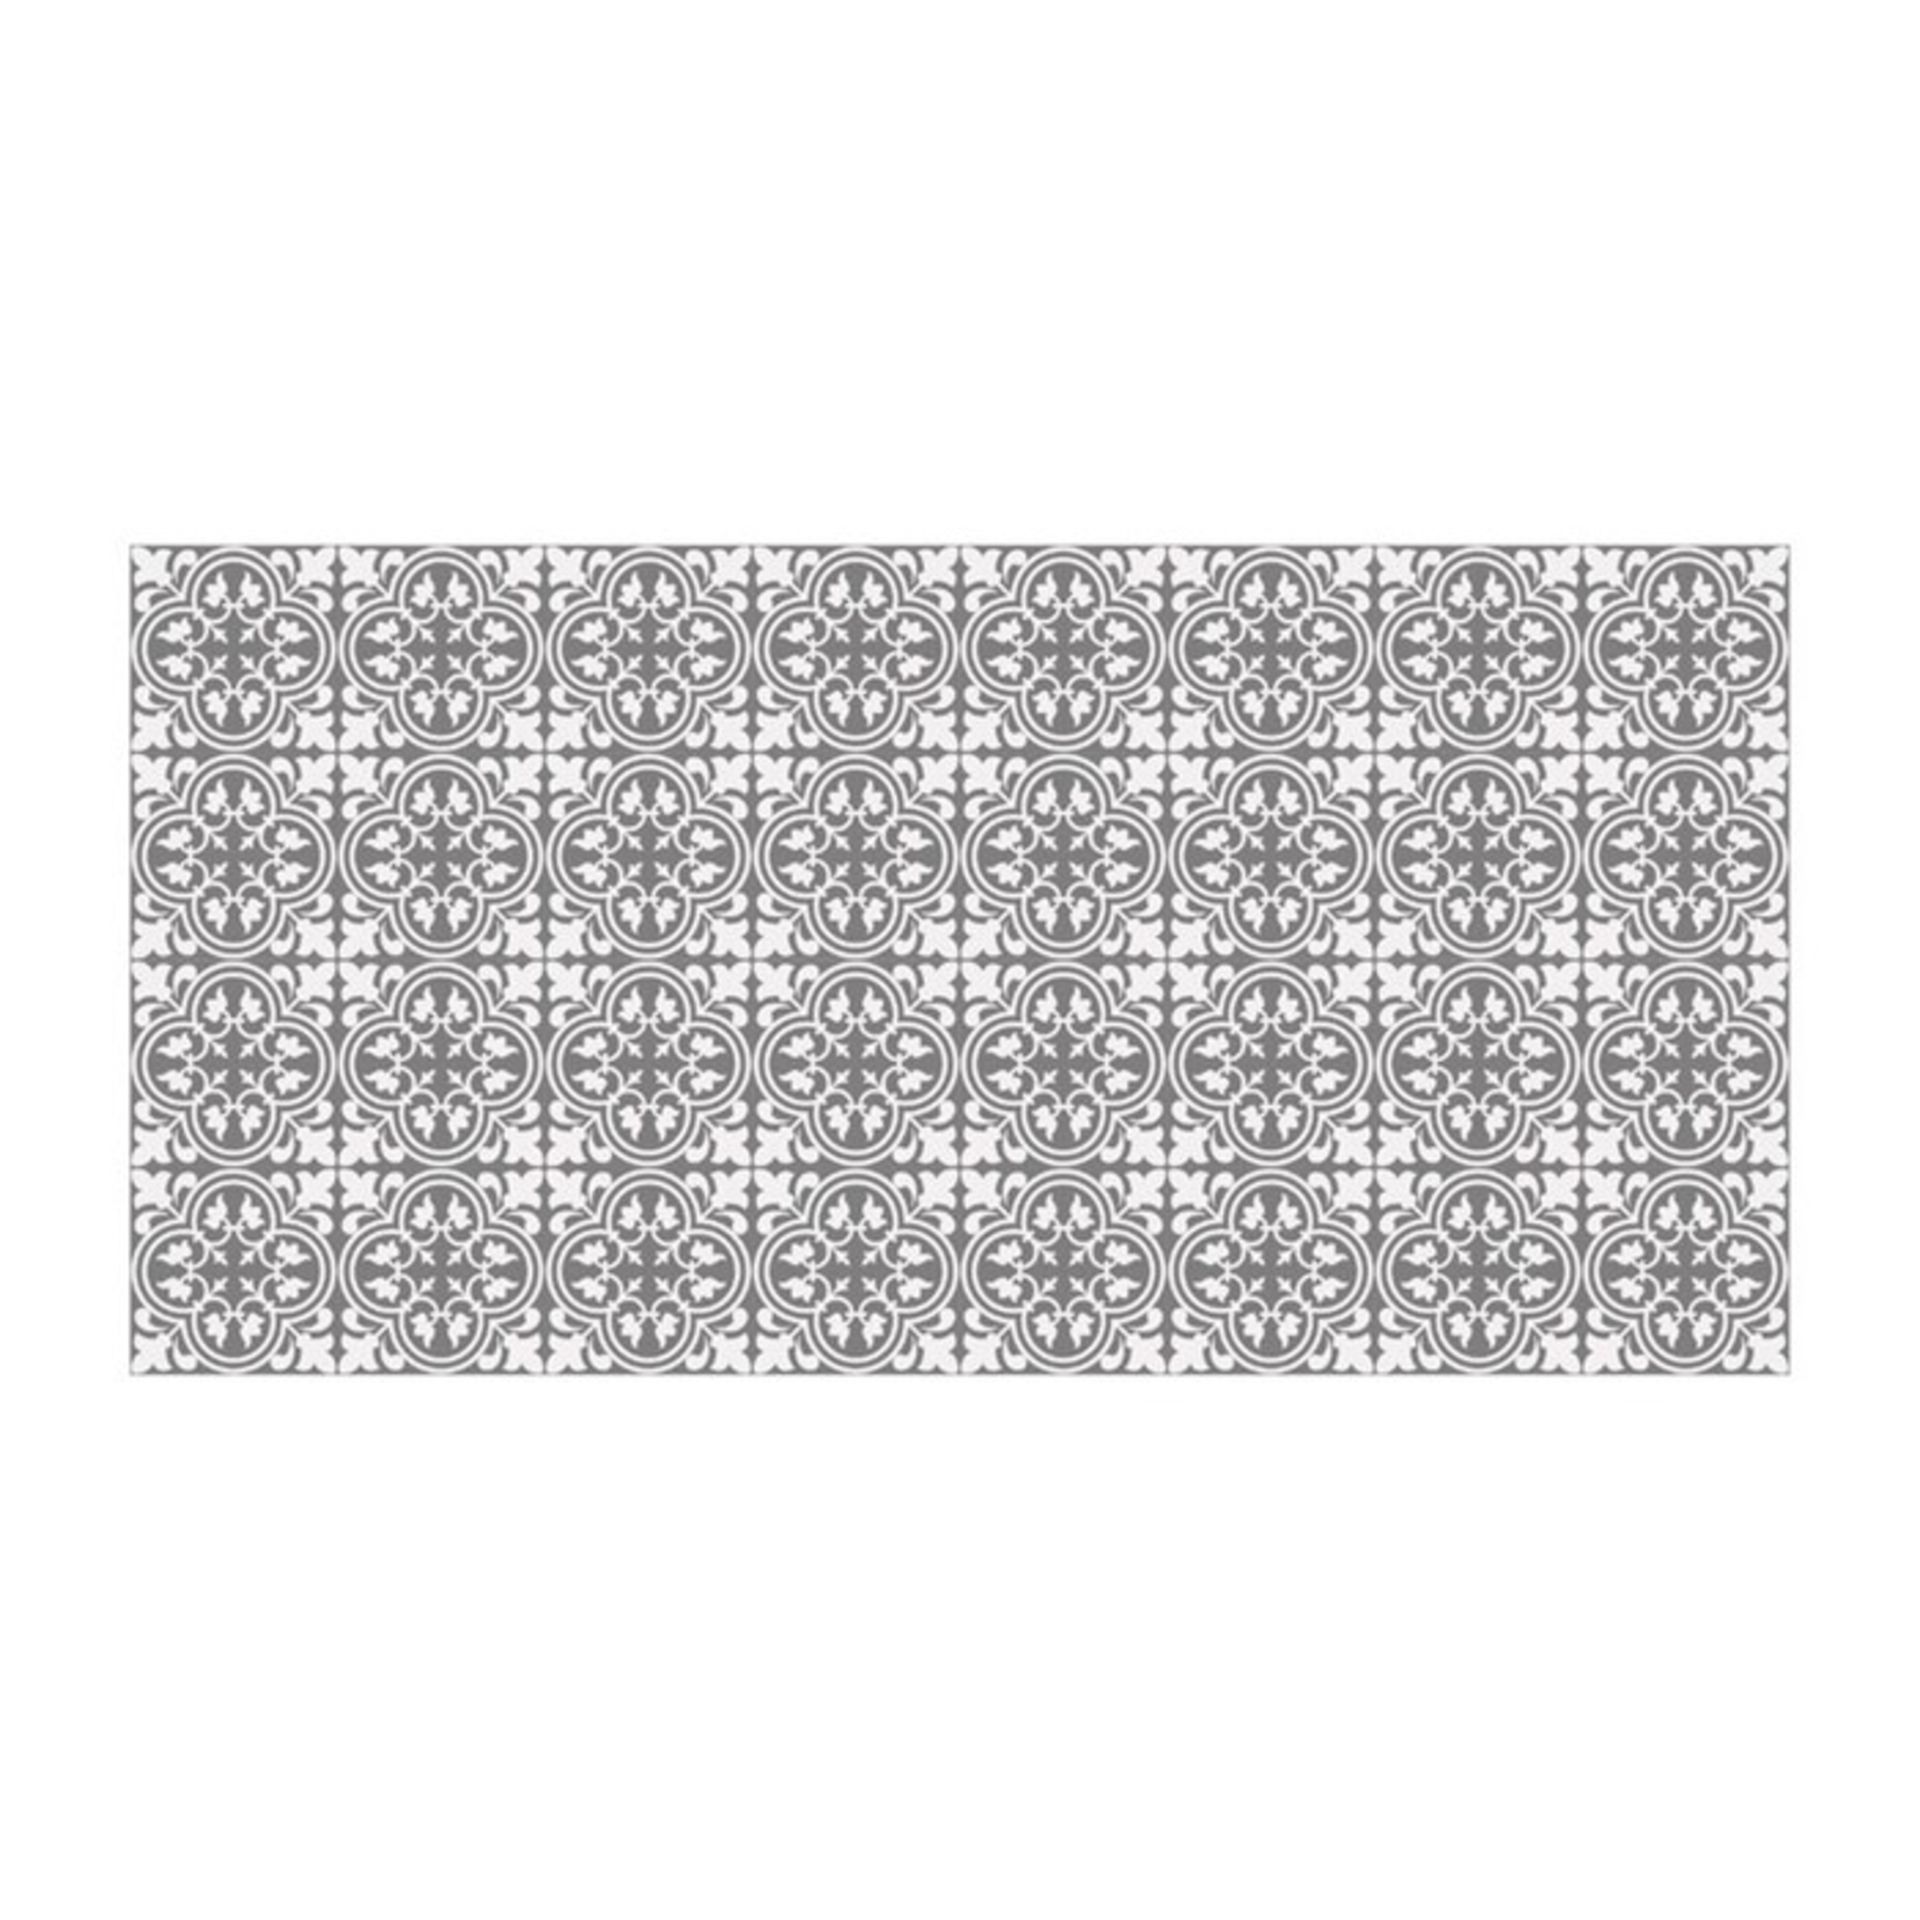 World Menagerie, Carnlea 121 x 60 cm PVC Patterned Tile in Grey - RRP £55.99 (BF938874.48000735 -